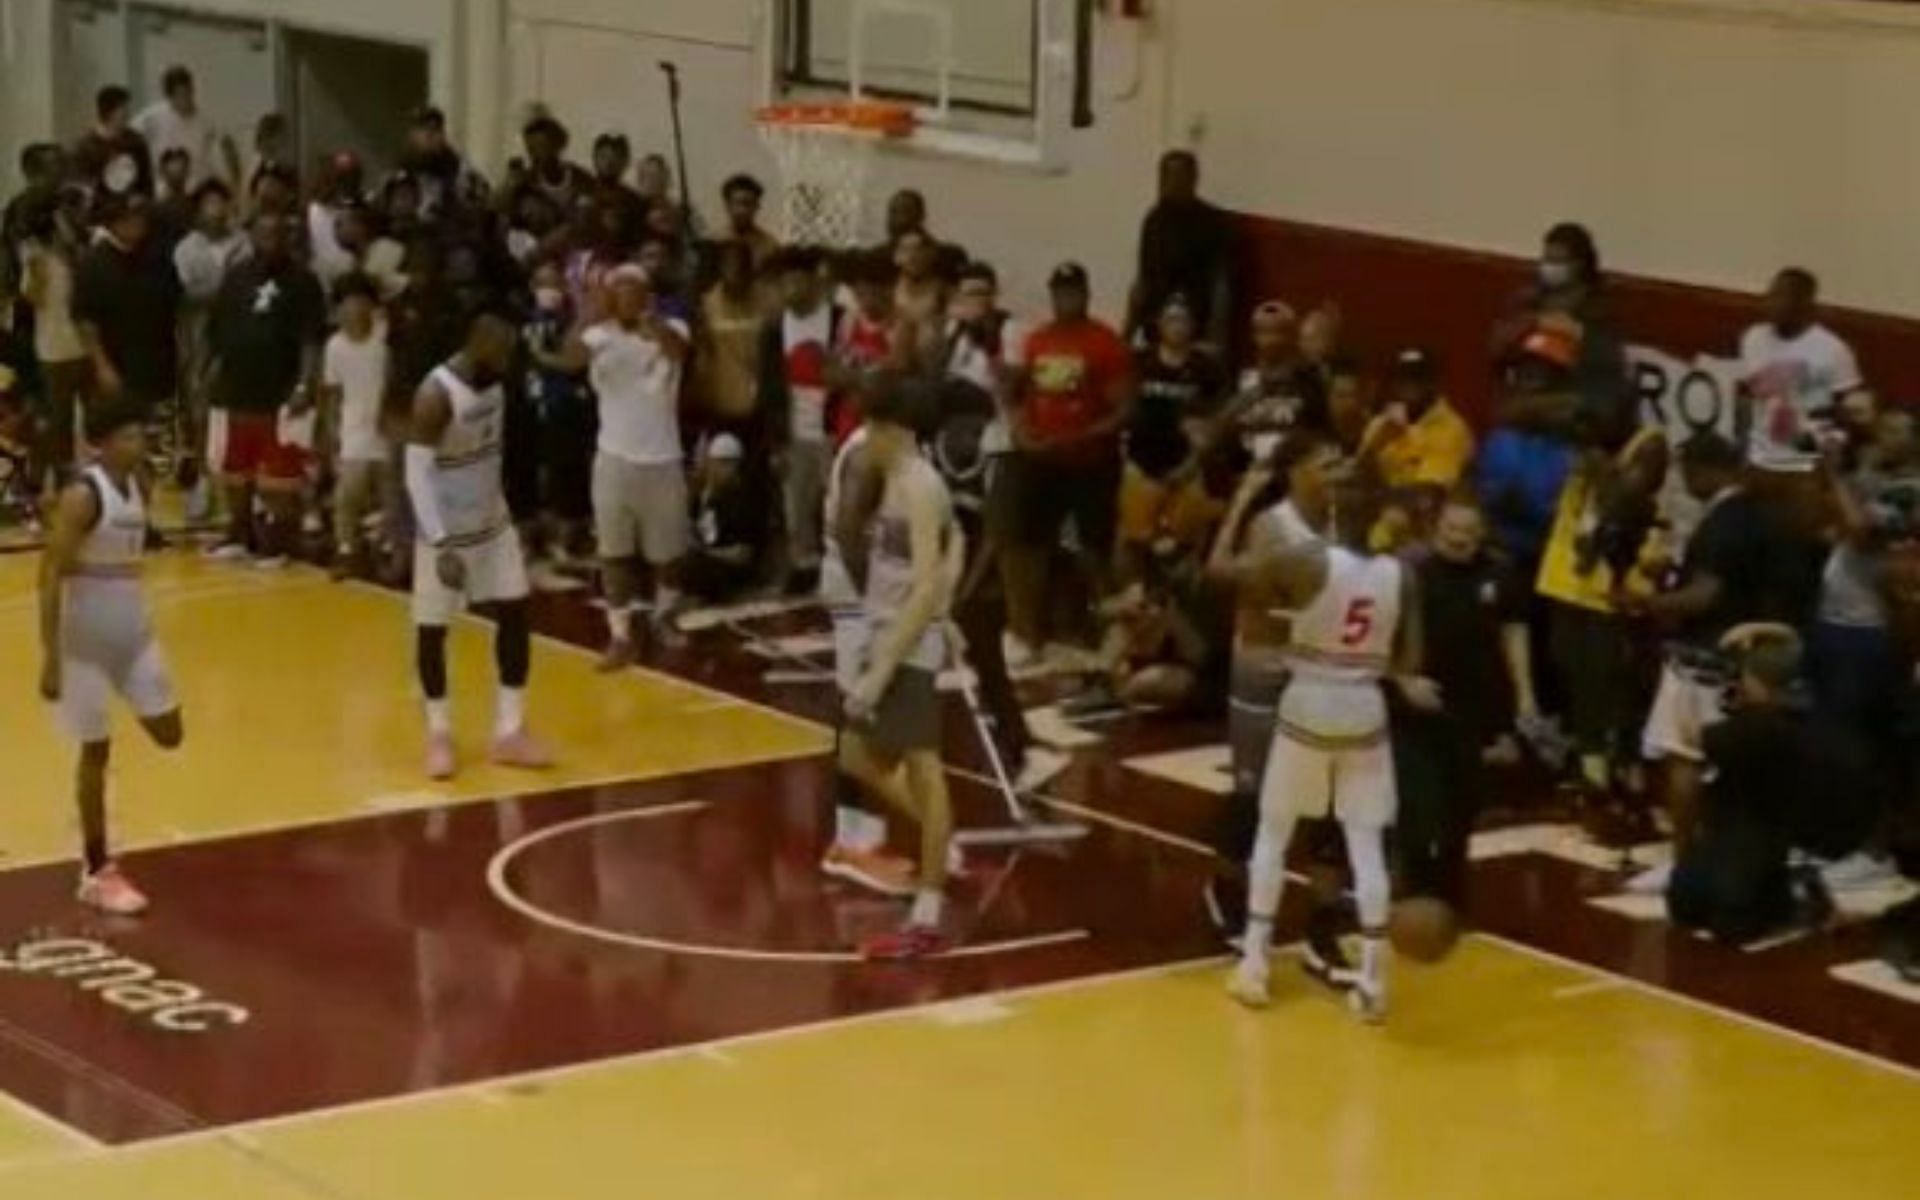 Paolo Banchero and Dejounte Murray dap each other during The CrawsOver Pro-Am game